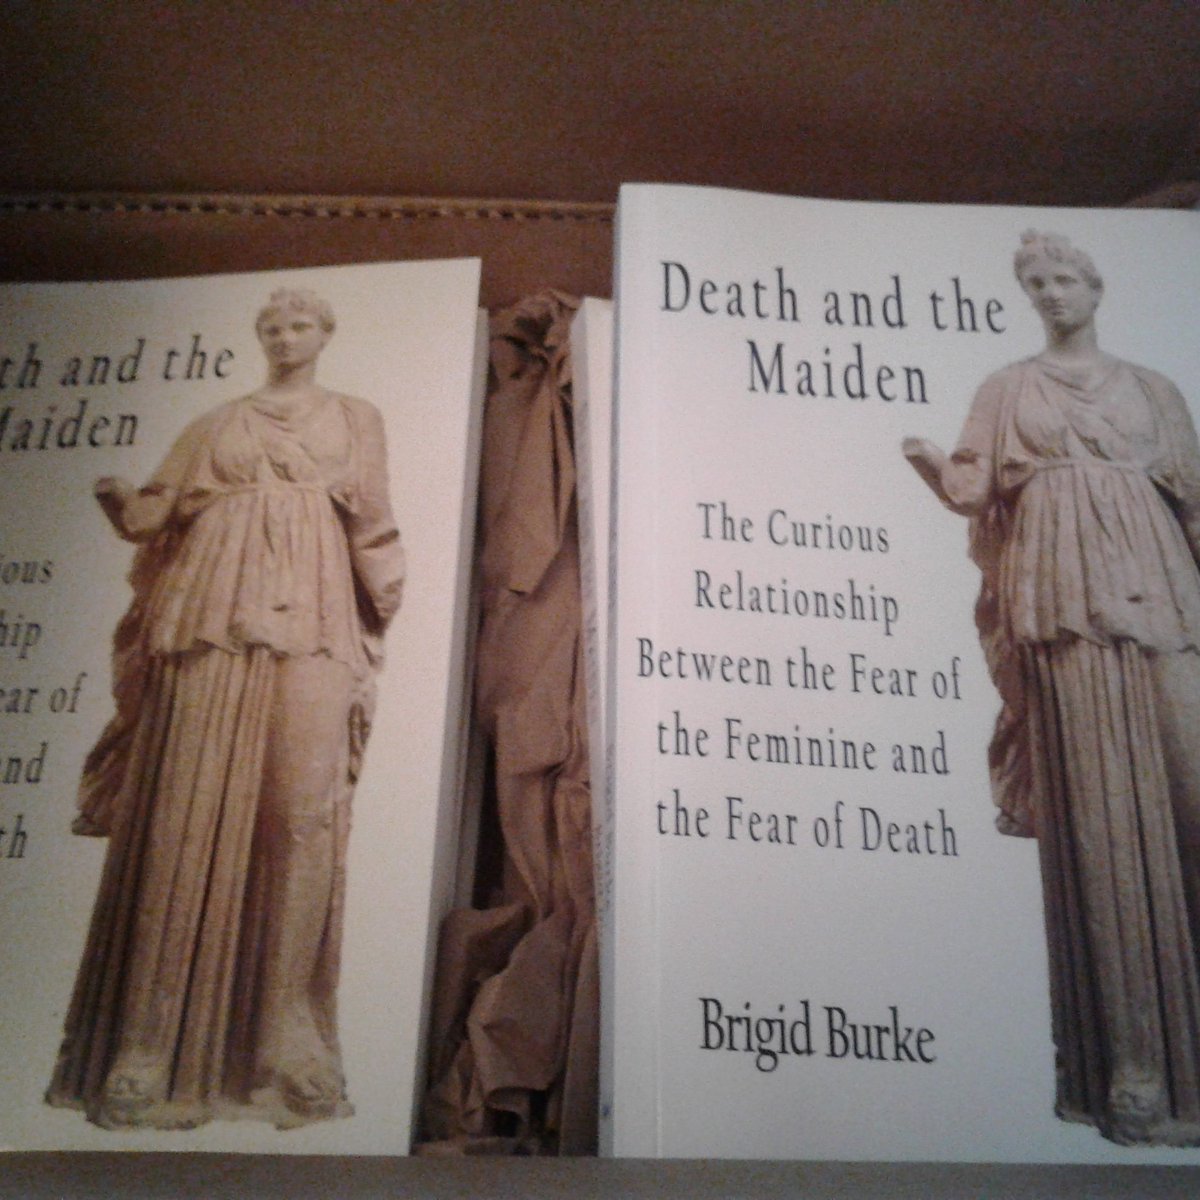 Publisher copies of my book have arrived! If you would like to be in a drawing for a free copy, like this post! Shares are good too. 😊 #chthonia #feminine #dark #death #ancientreligion #book #Contest #giveaway